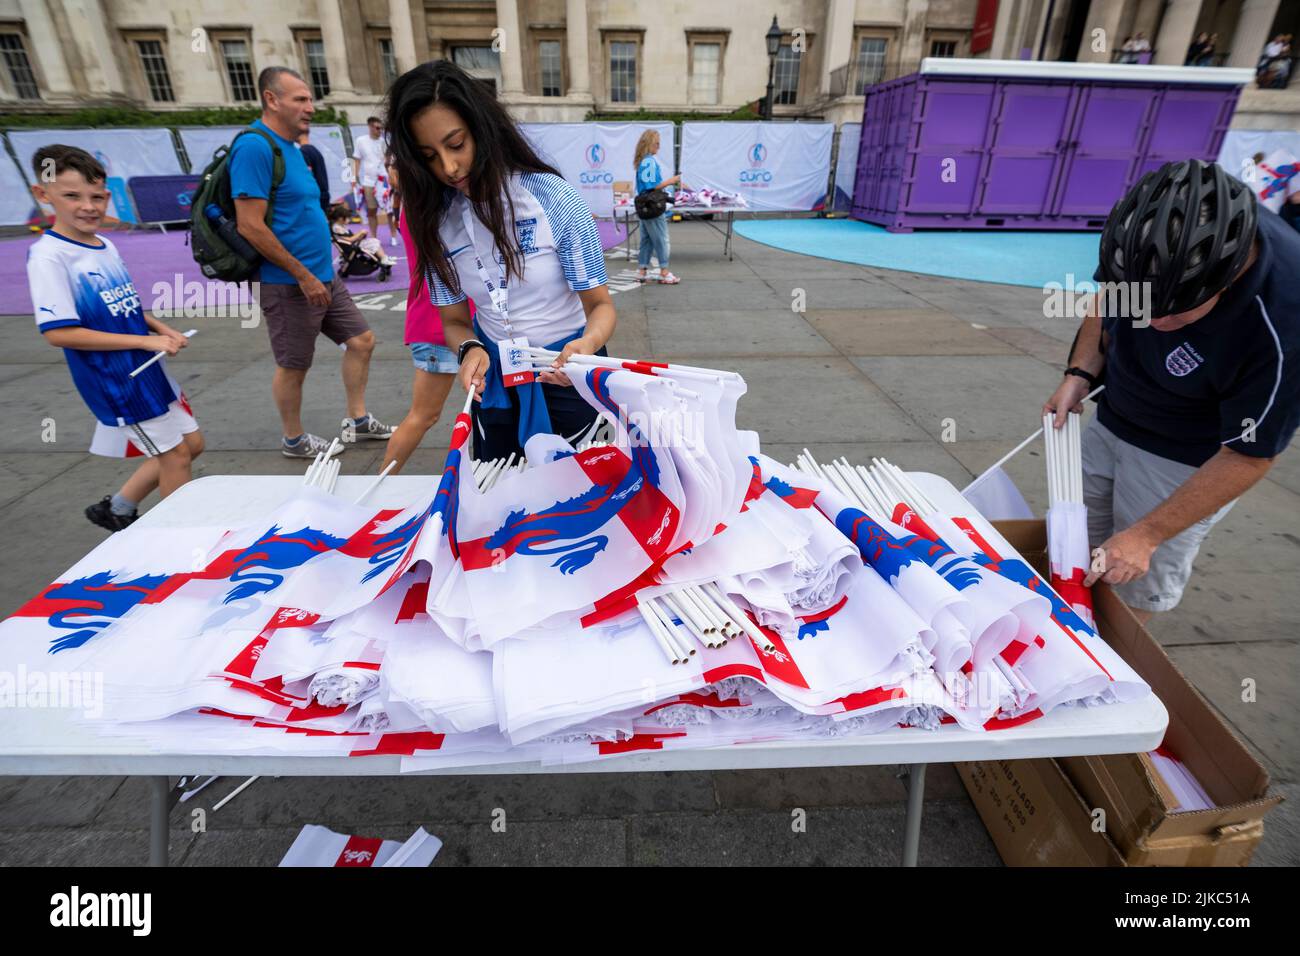 London, UK.  1 August 2022.  National flags being handed out for free as members of the Women’s England football team and manager Sarina Wiegman, celebrate with 7,000 fans in Trafalgar Square after winning the European Championship final (Euro 2022) against Germany at Wembley Stadium the day before.  Credit: Stephen Chung / Alamy Live News Stock Photo